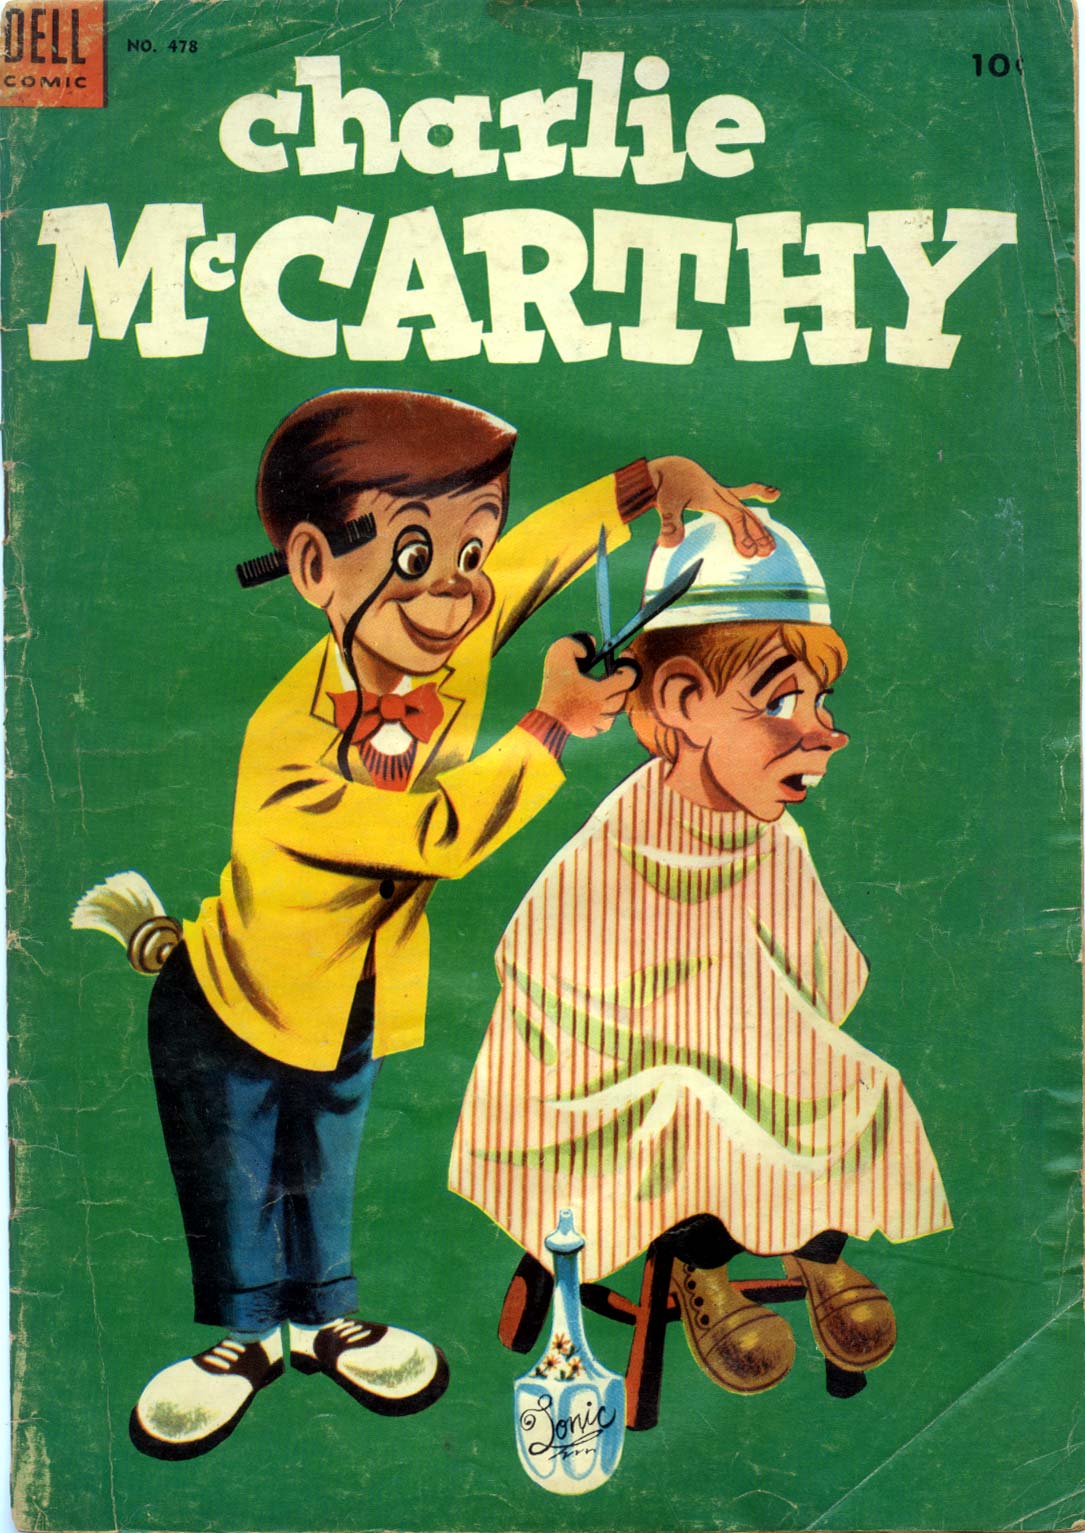 Comic Book Cover For 0478 - Charlie McCarthy